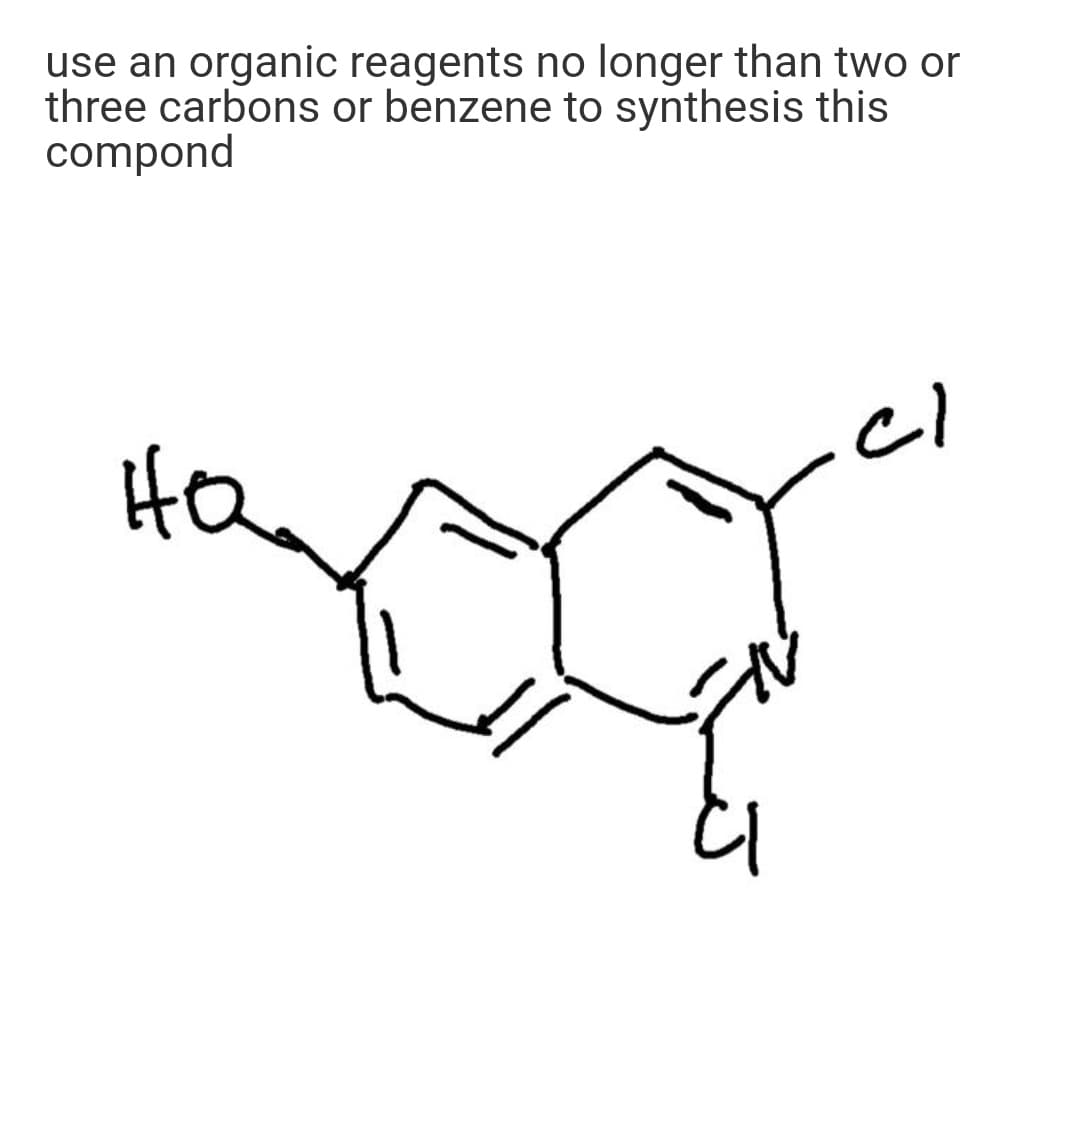 use an organic reagents no longer than two or
three carbons or benzene to synthesis this
compond
Ha
